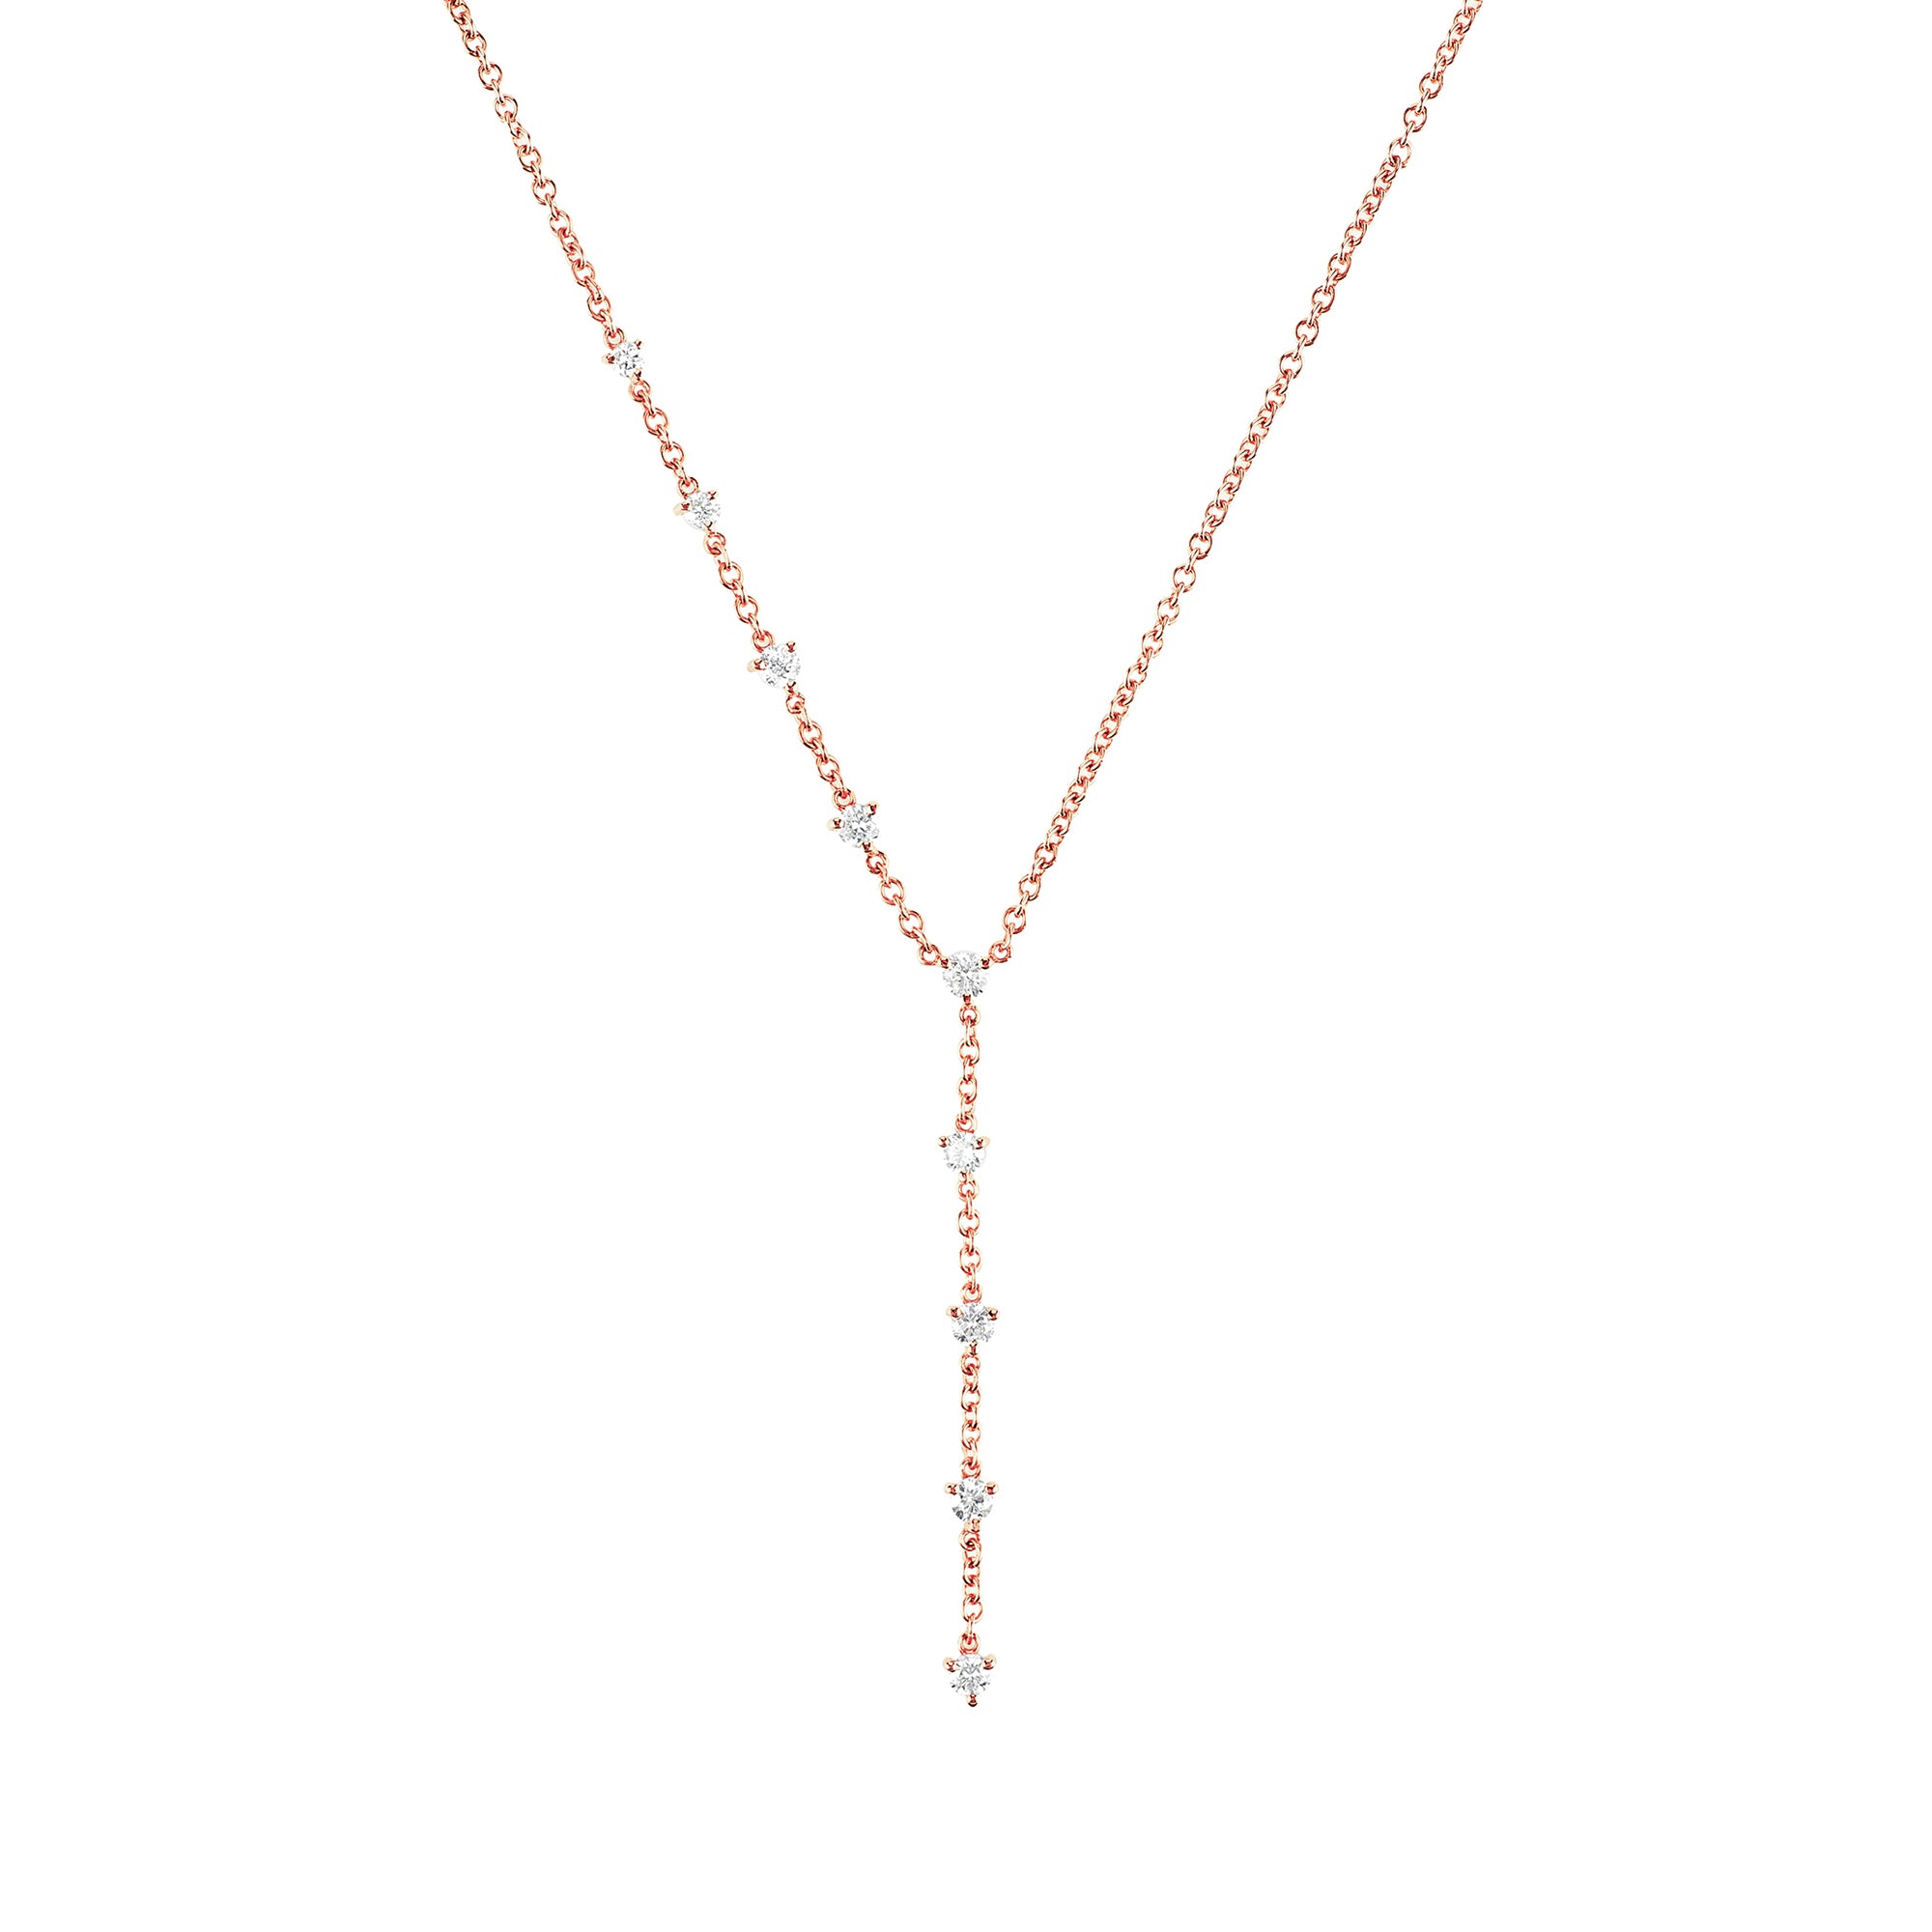 Stella necklace rose gold by Stone Paris